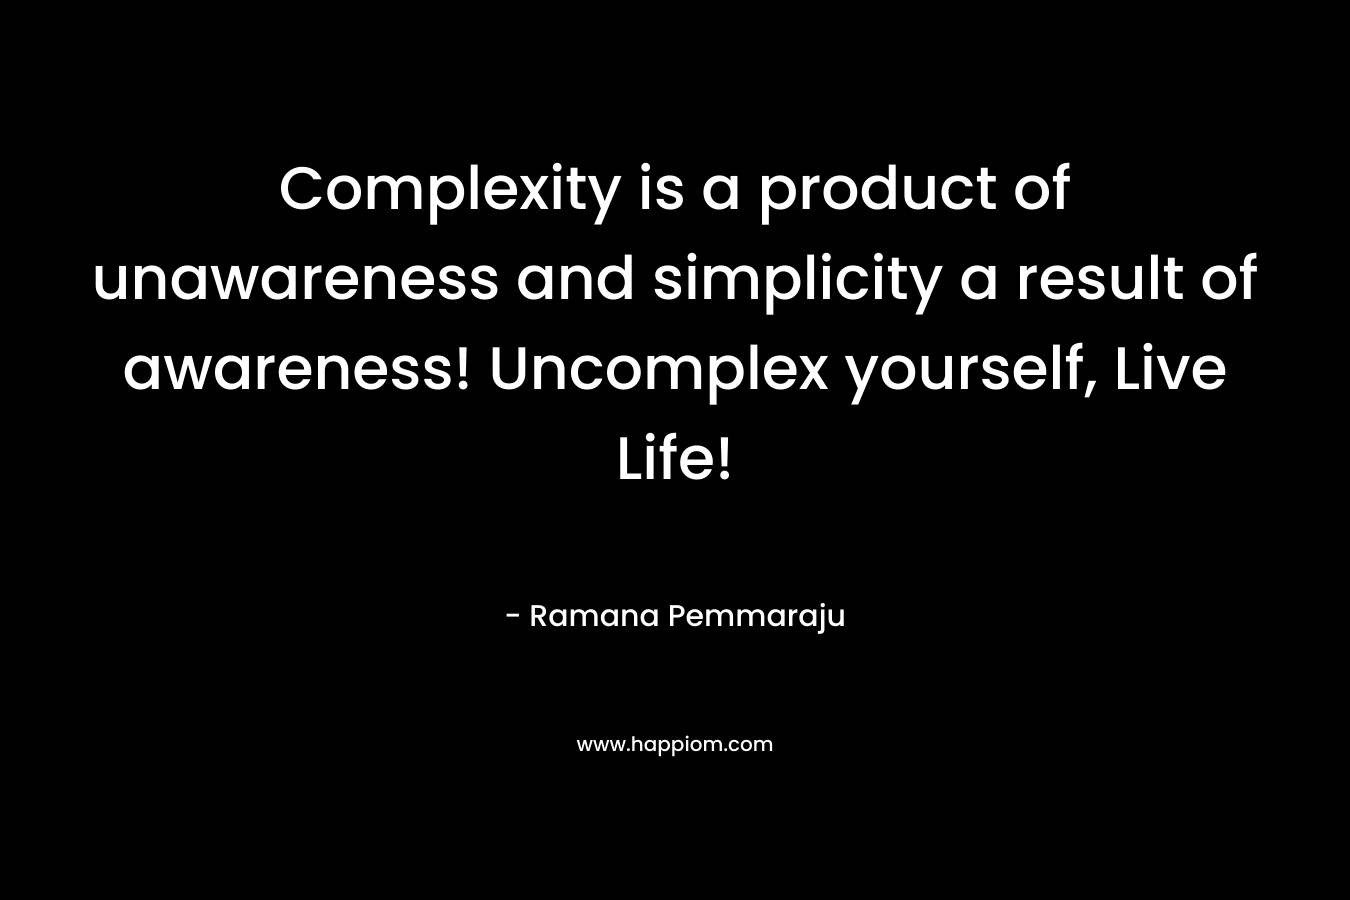 Complexity is a product of unawareness and simplicity a result of awareness! Uncomplex yourself, Live Life!